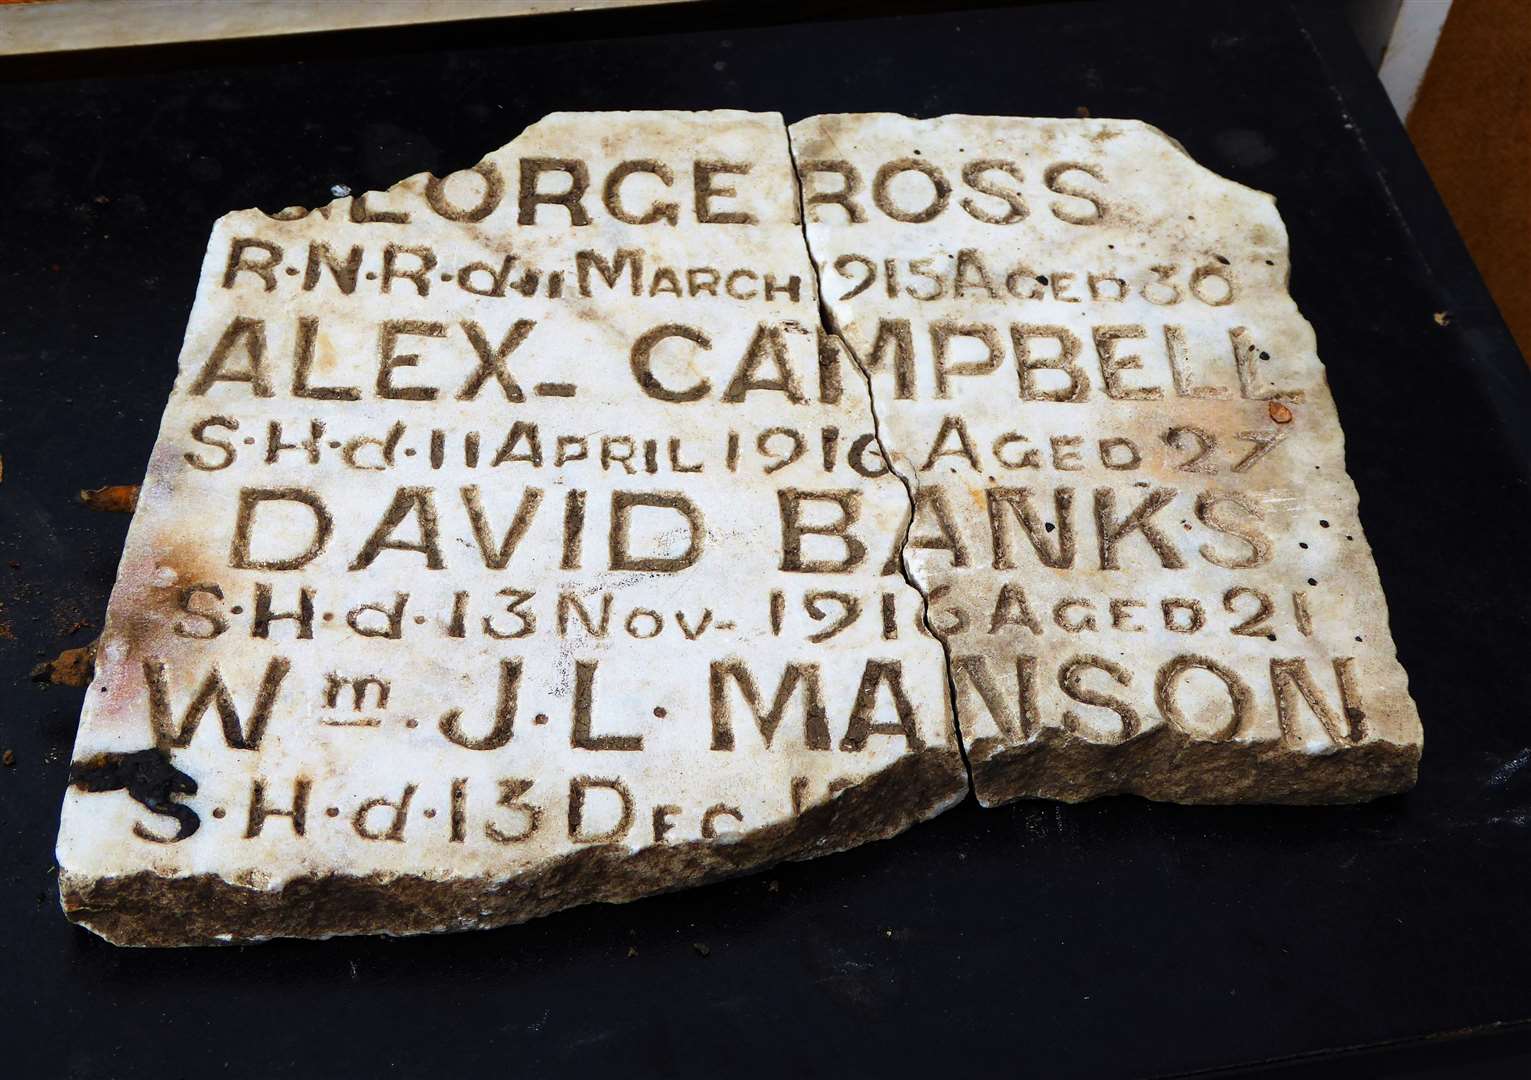 The information became much clearer when the two fragments were joined together and showed names of four Caithness men who had died during the First World War. Picture: DGS